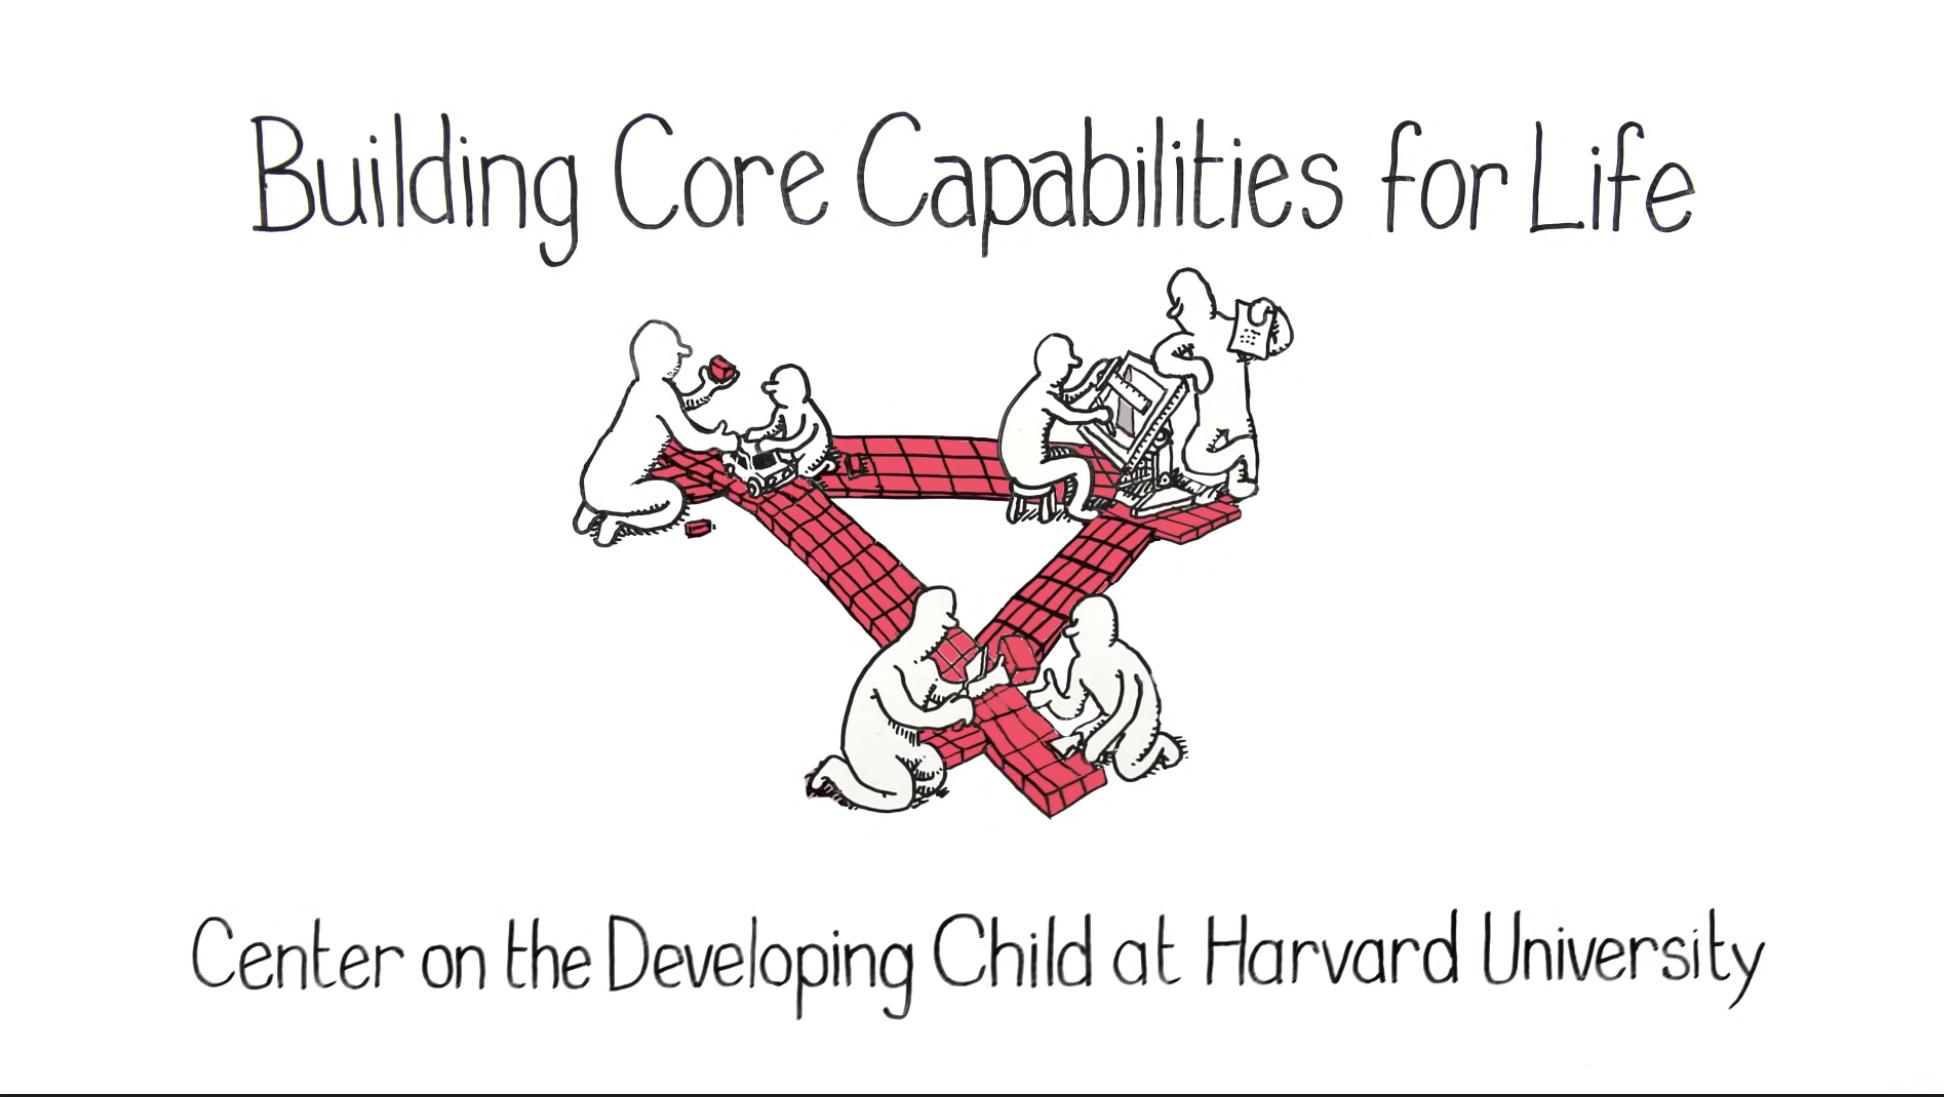 How Children and Adults Can Build Core Capabilities for Life